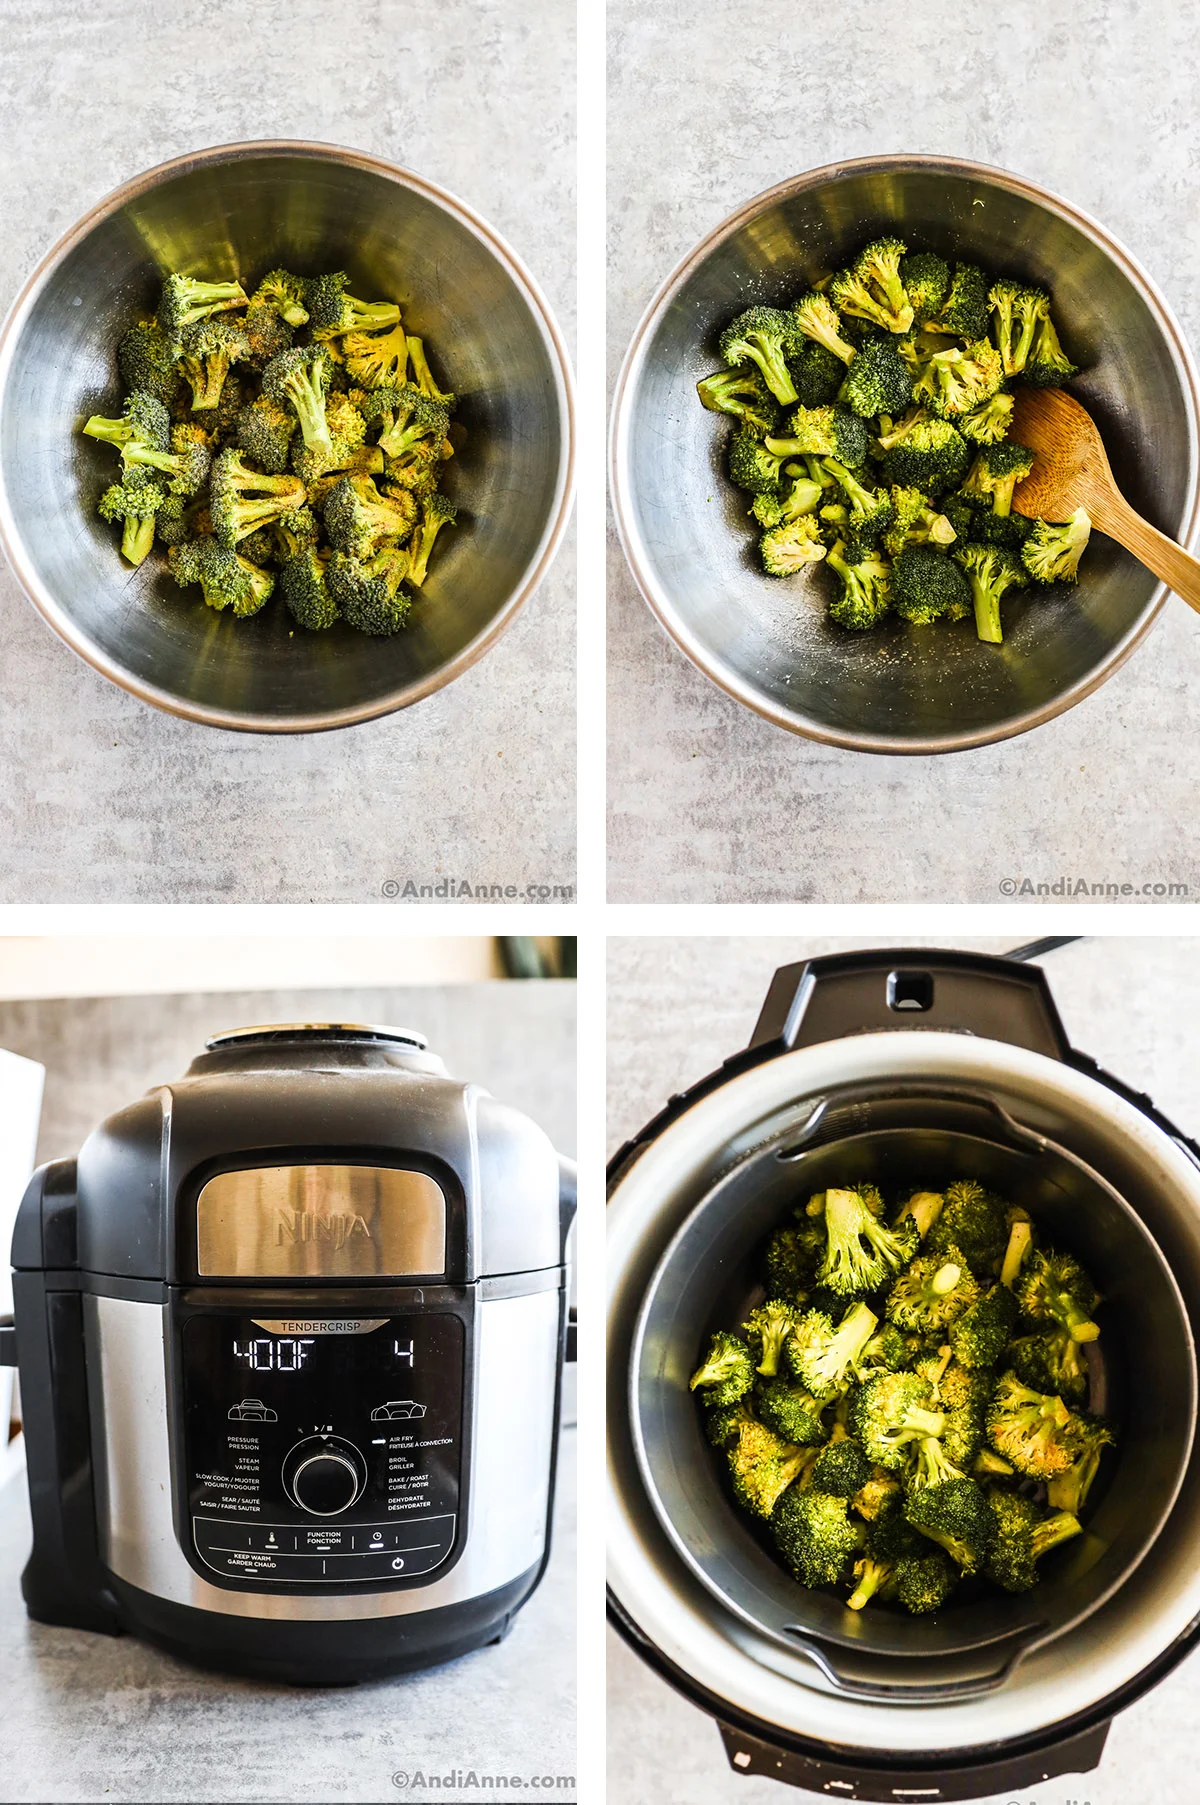 Four images, first is bowl of raw broccoli florets, second is broccoli with spices in a bowl, third is ninja foodi deluxe with 400F temperature, fourth is looking into an air fryer with broccoli florets.